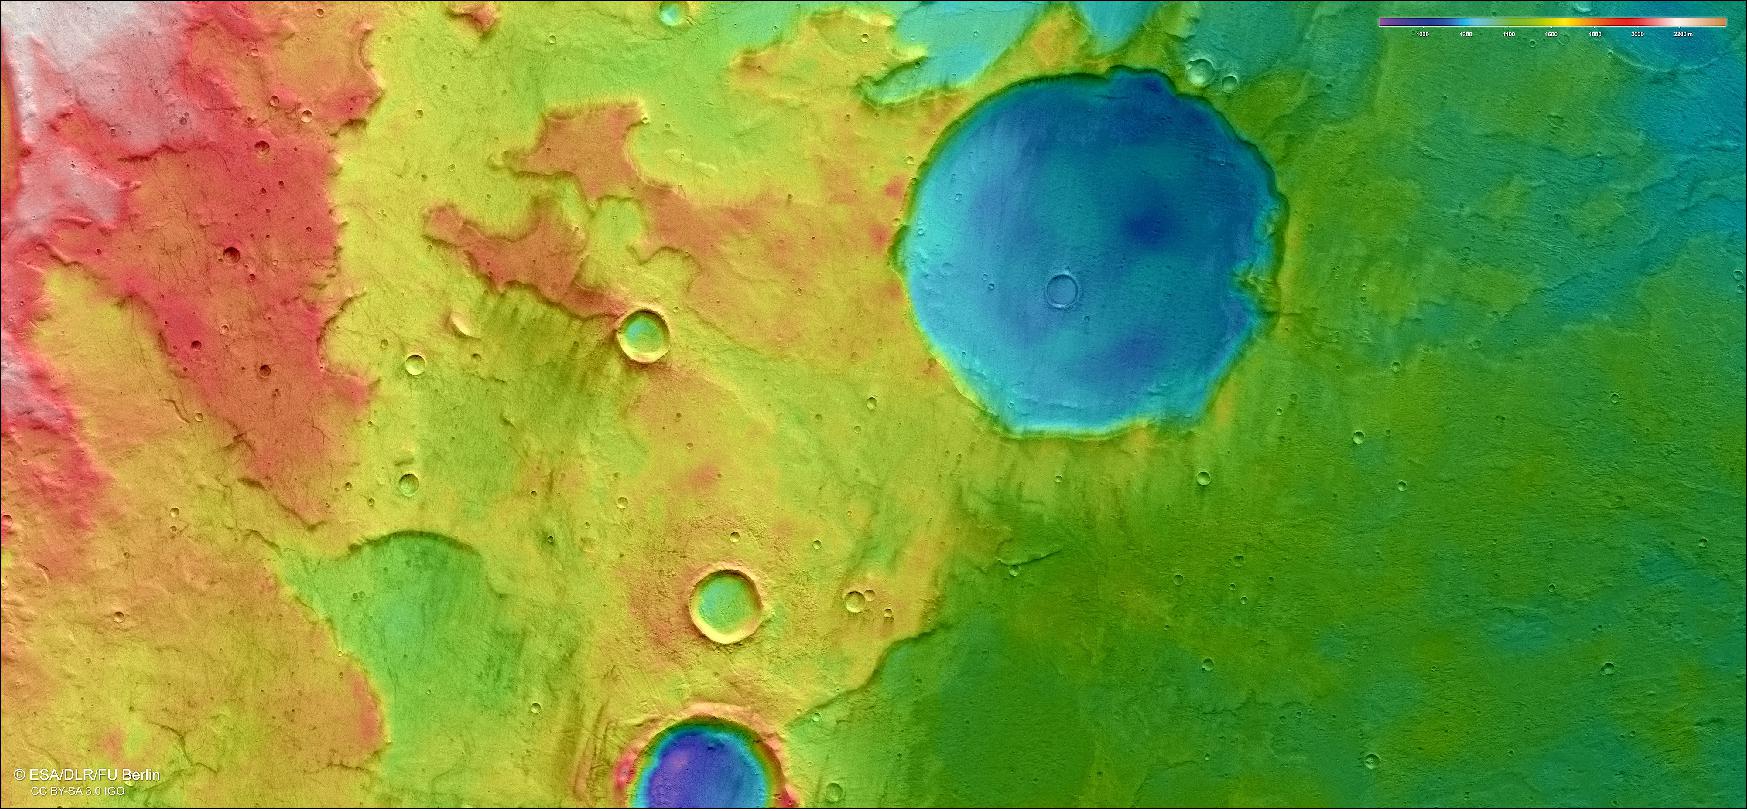 Figure 25: Topographic view of Terra Cimmeria. This color-coded topographic view shows Terra Cimmeria, a region found in the southern highlands of Mars. Lower parts of the surface are shown in blues and purples, while higher altitude regions show up in whites, yellows, and reds, as indicated on the scale to the top right. This view is based on a digital terrain model of the region, from which the topography of the landscape can be derived. It comprises data obtained by the HRSC on Mars Express on 11 December 2018 during orbit 18904. The ground resolution is approximately 13 m/pixel and the images are centered at about 171º East and 40º South. North is to the right (image credit: ESA/DLR/FU Berlin, CC BY-SA 3.0 IGO)